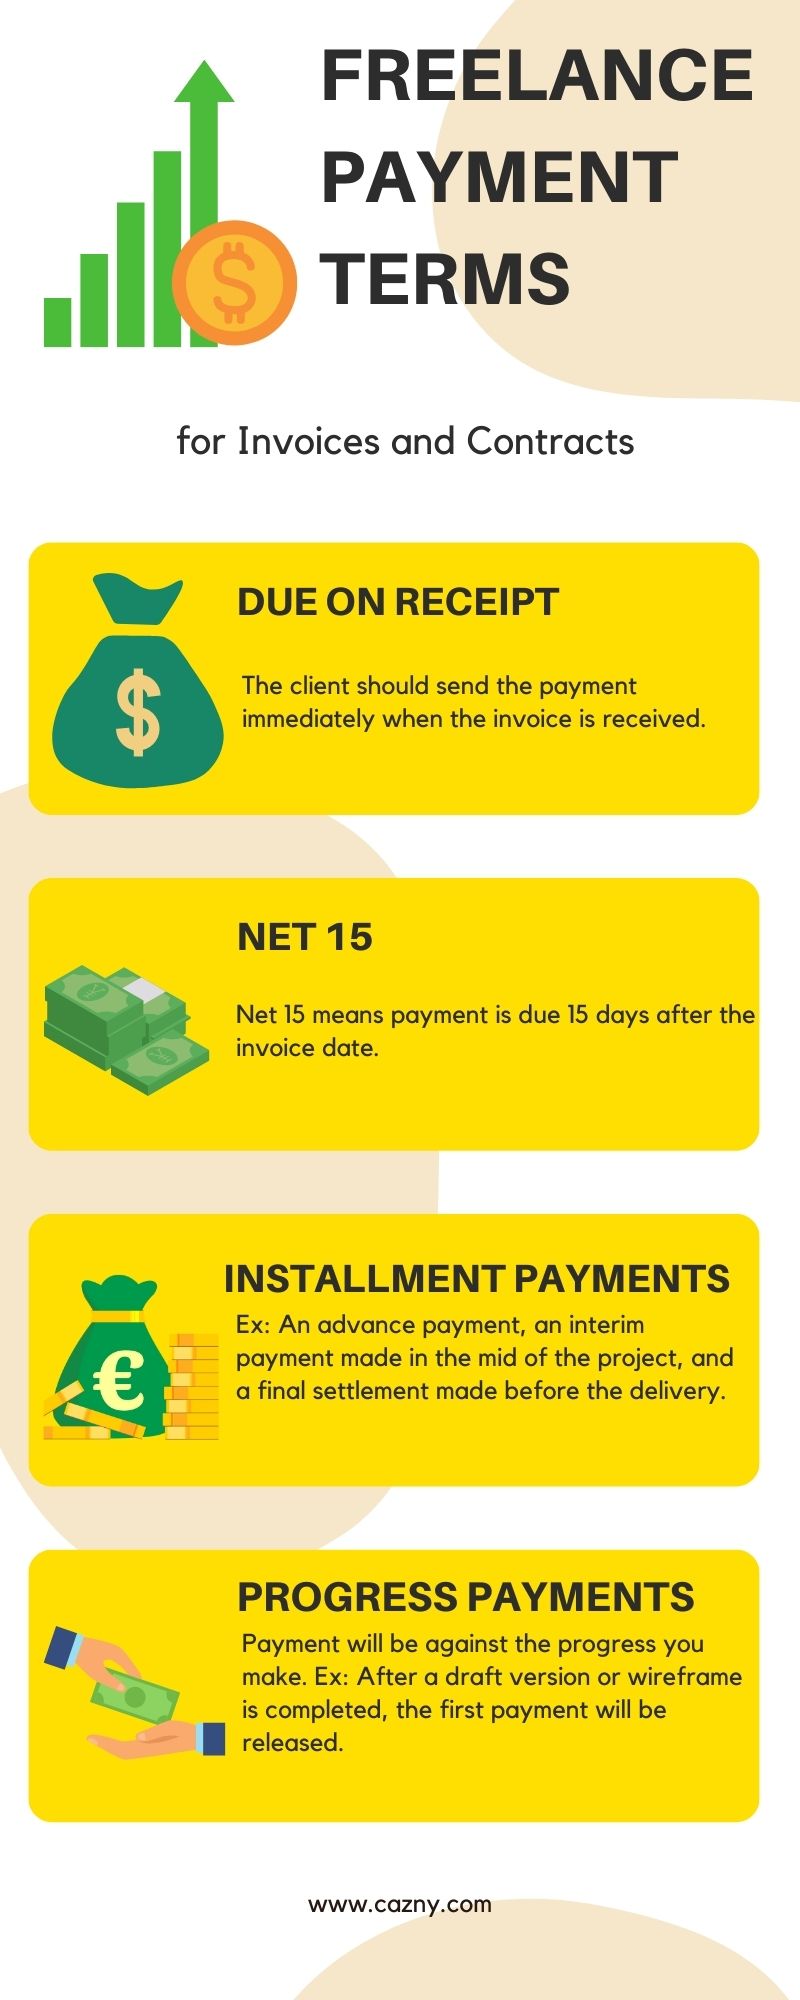 Freelance Payment Terms